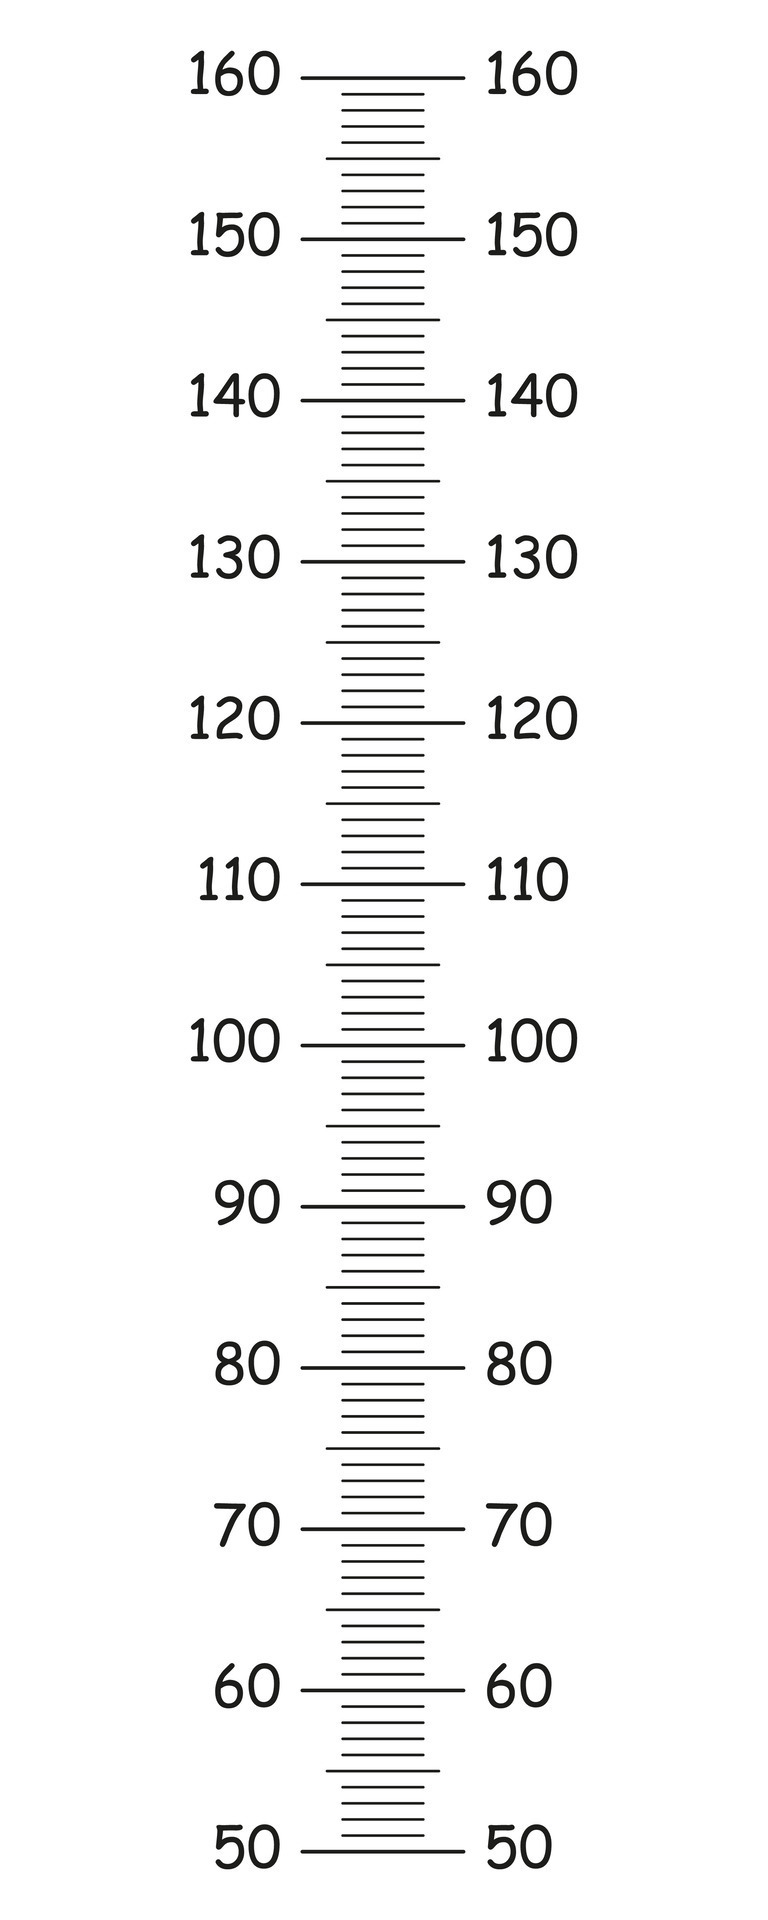 https://static.vecteezy.com/system/resources/previews/027/996/159/original/kids-height-chart-from-50-to-160-centimeters-template-for-wall-growth-sticker-isolated-on-a-white-background-simple-illustration-meter-wall-or-growth-ruler-eps-icon-vector.jpg